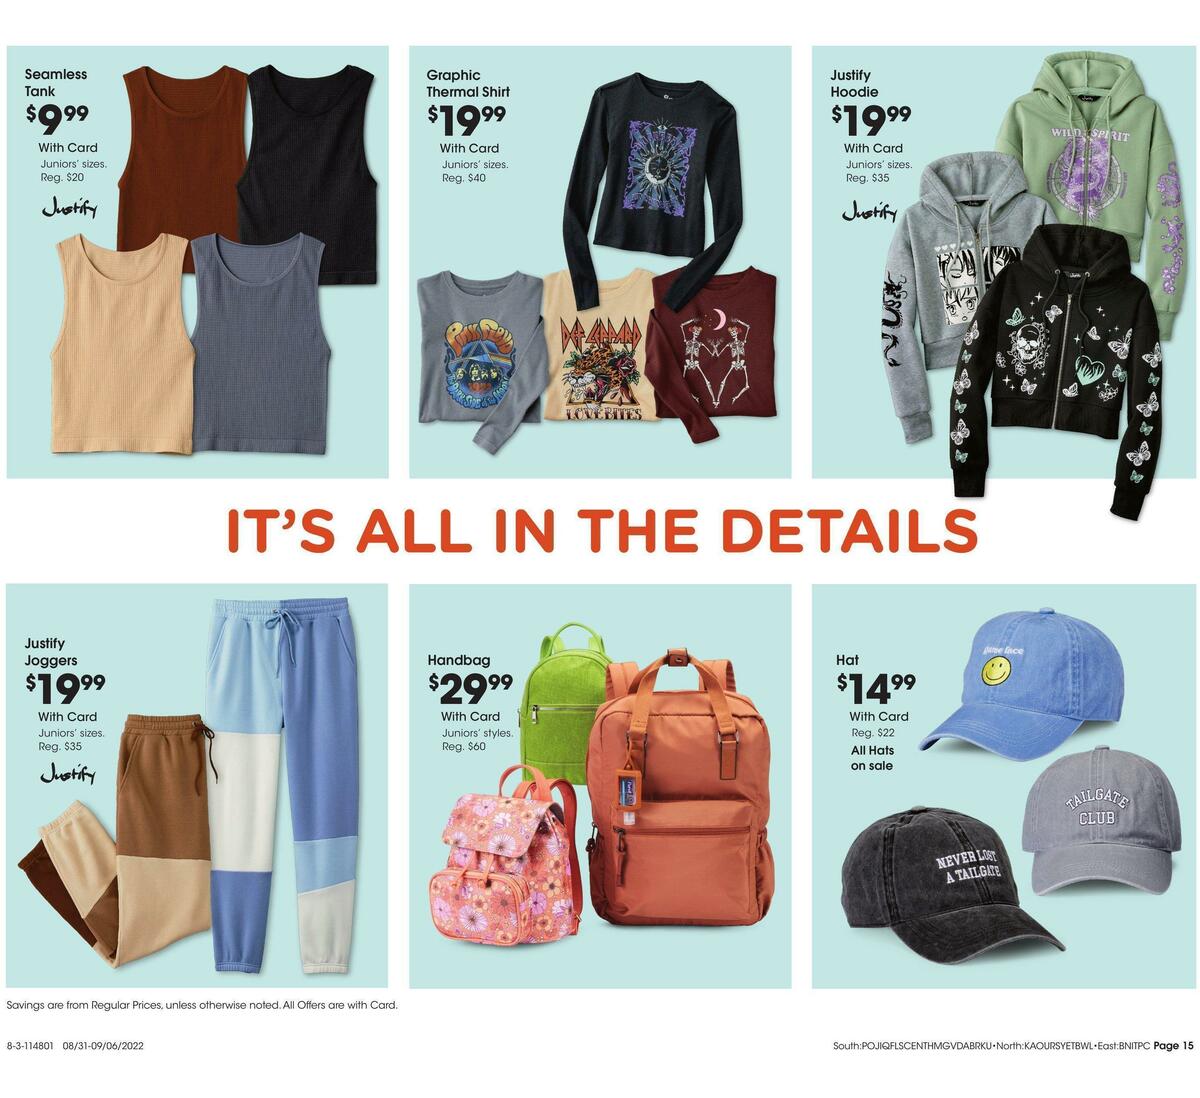 Fred Meyer General Merchandise Weekly Ad from August 31